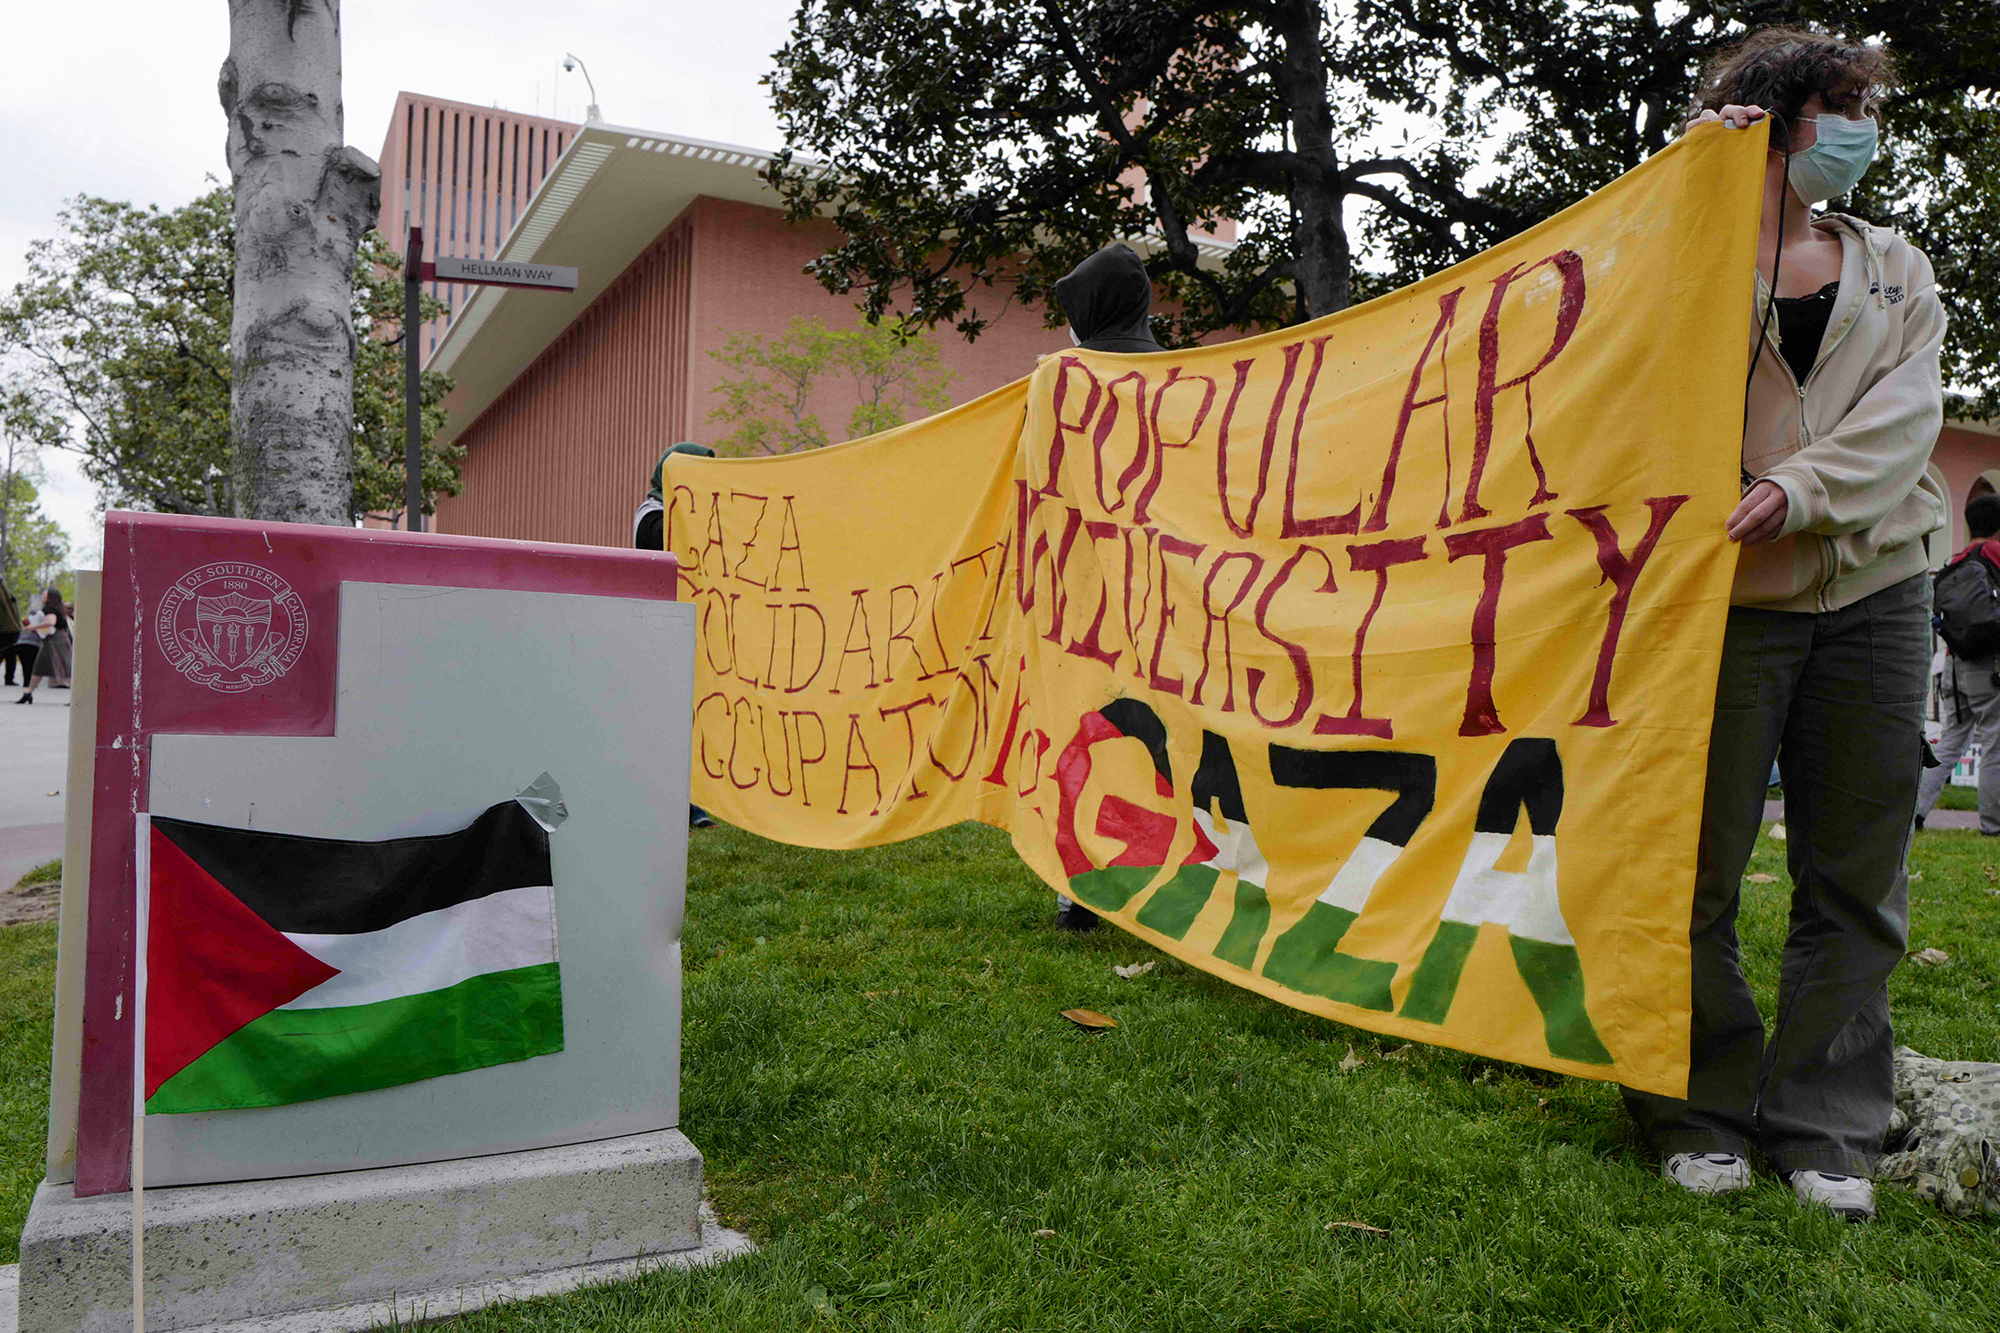 People hold a banner as students build a protest encampment in support of Palestinians, at the University of Southern California's Alumni Park in Los Angeles, California, on April 24.